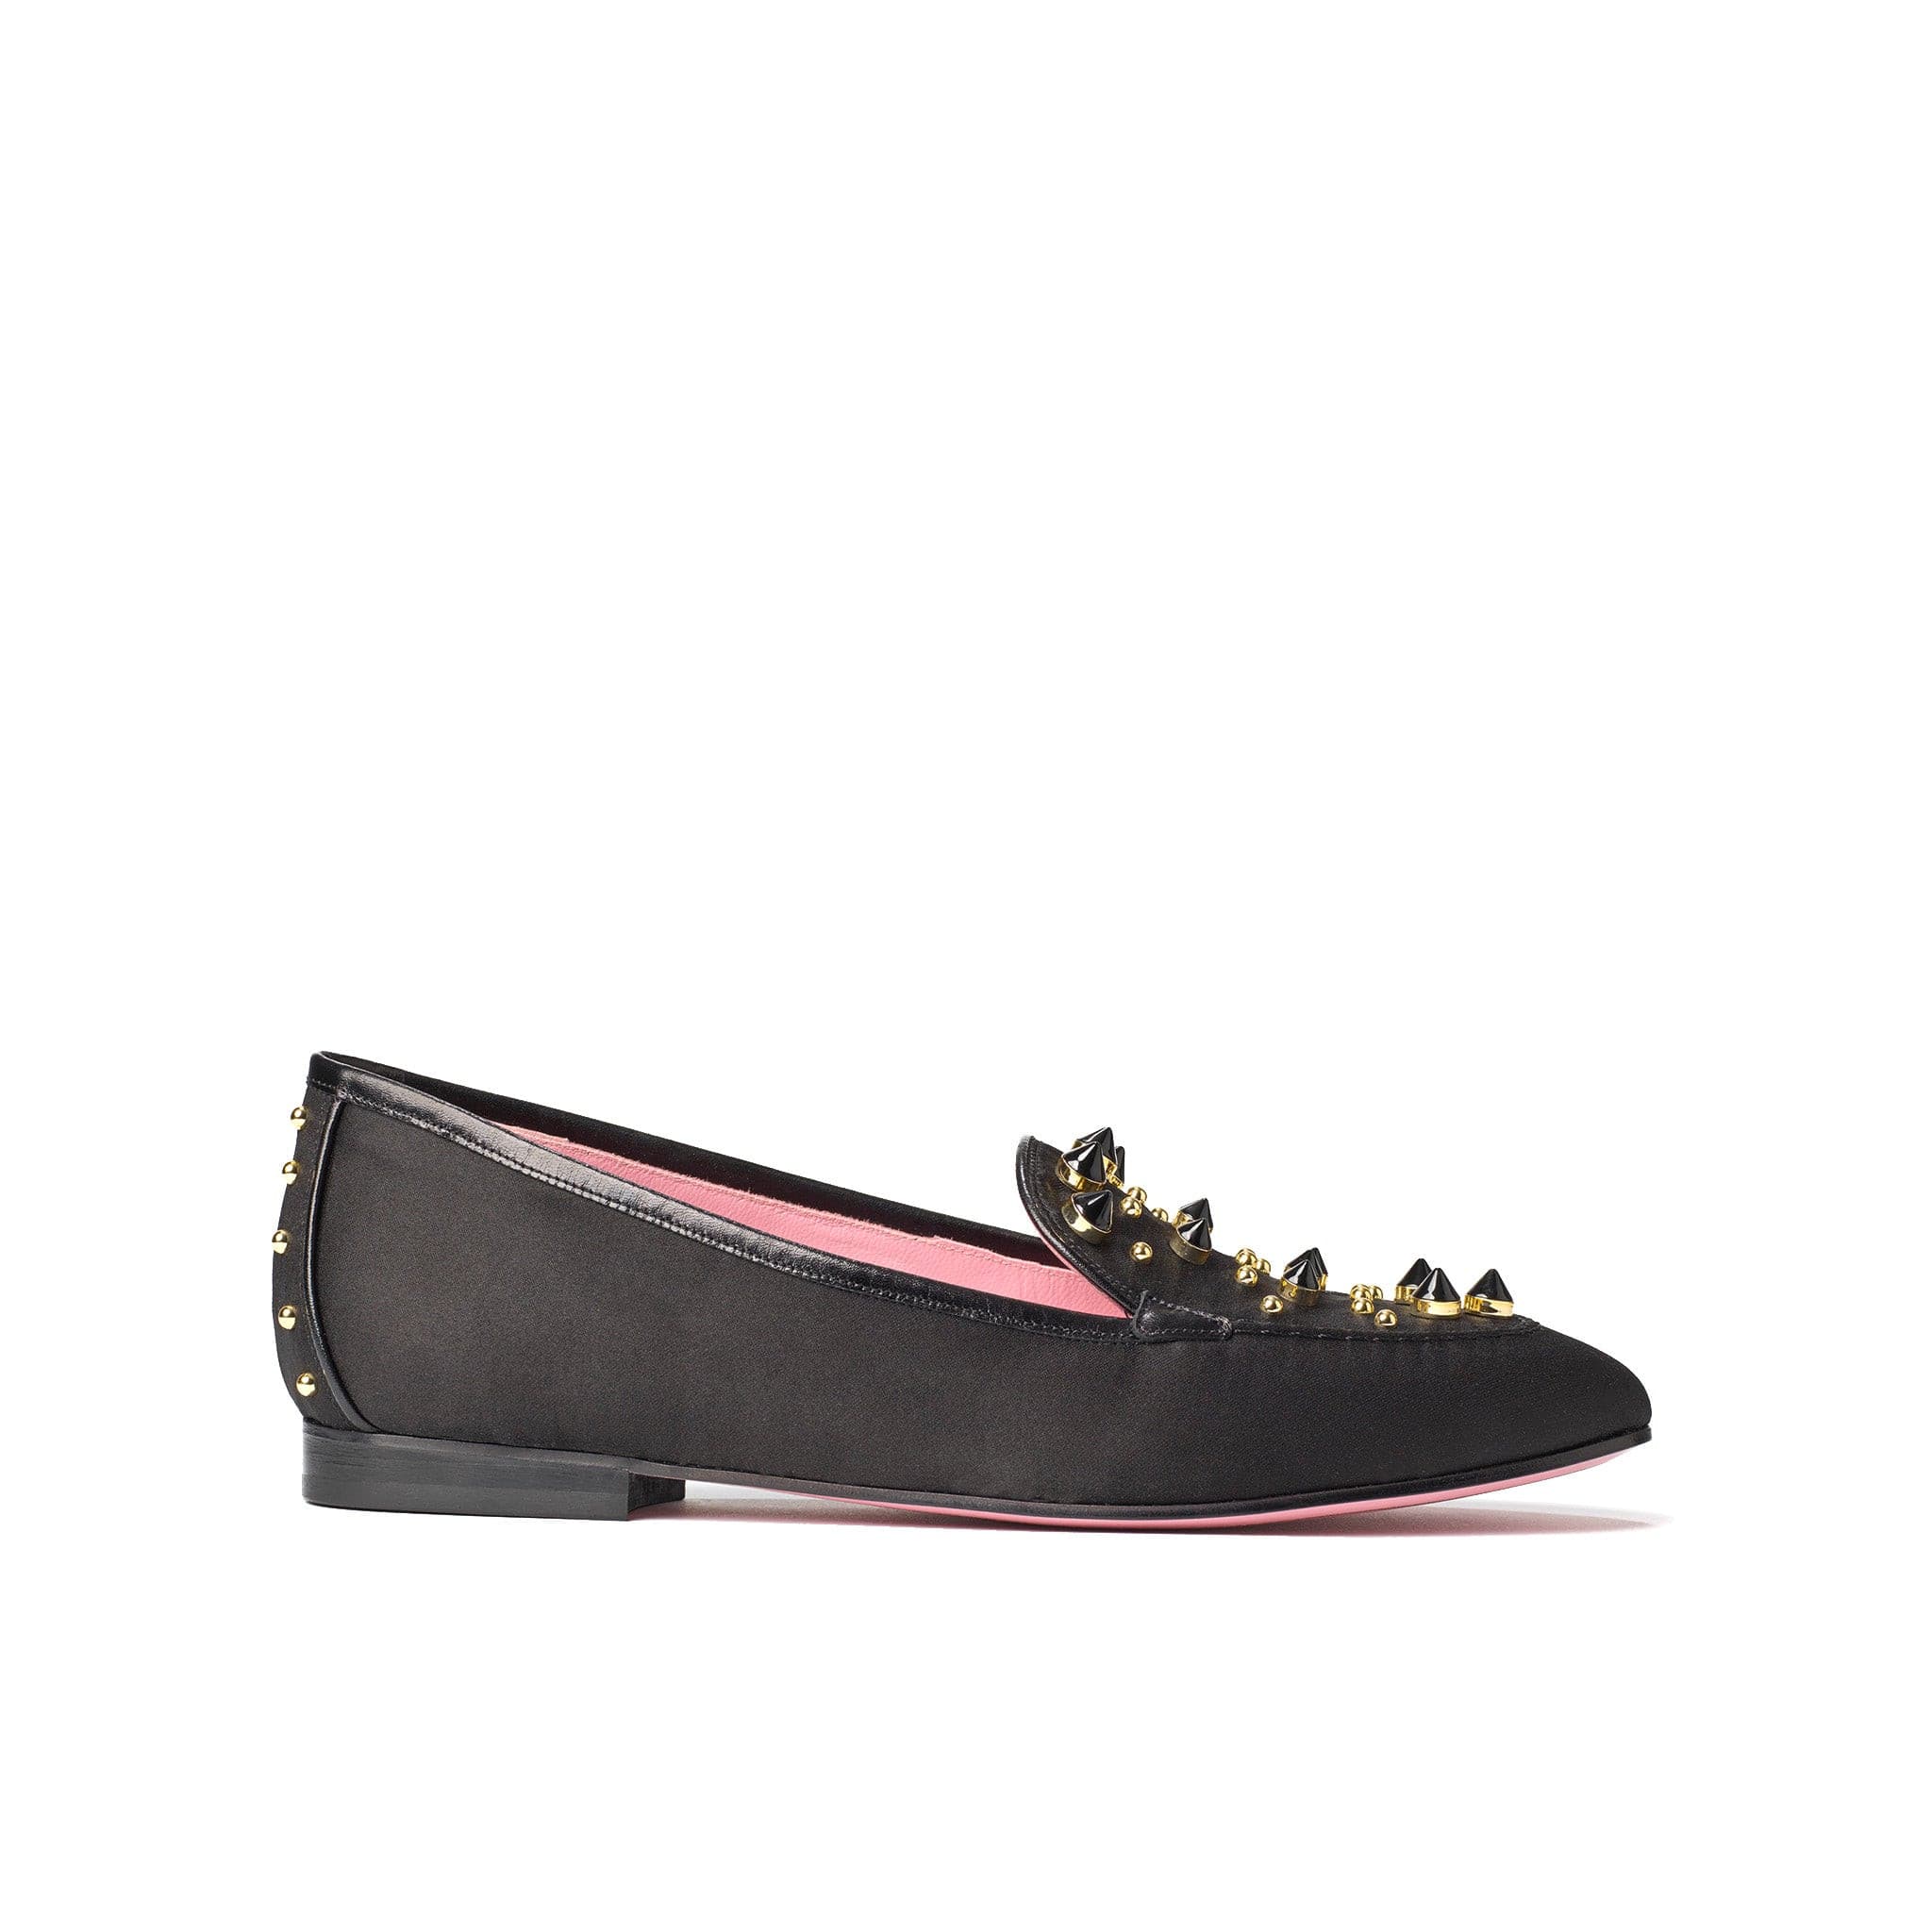 Phare studded loafer in black silk satin with black gold studs